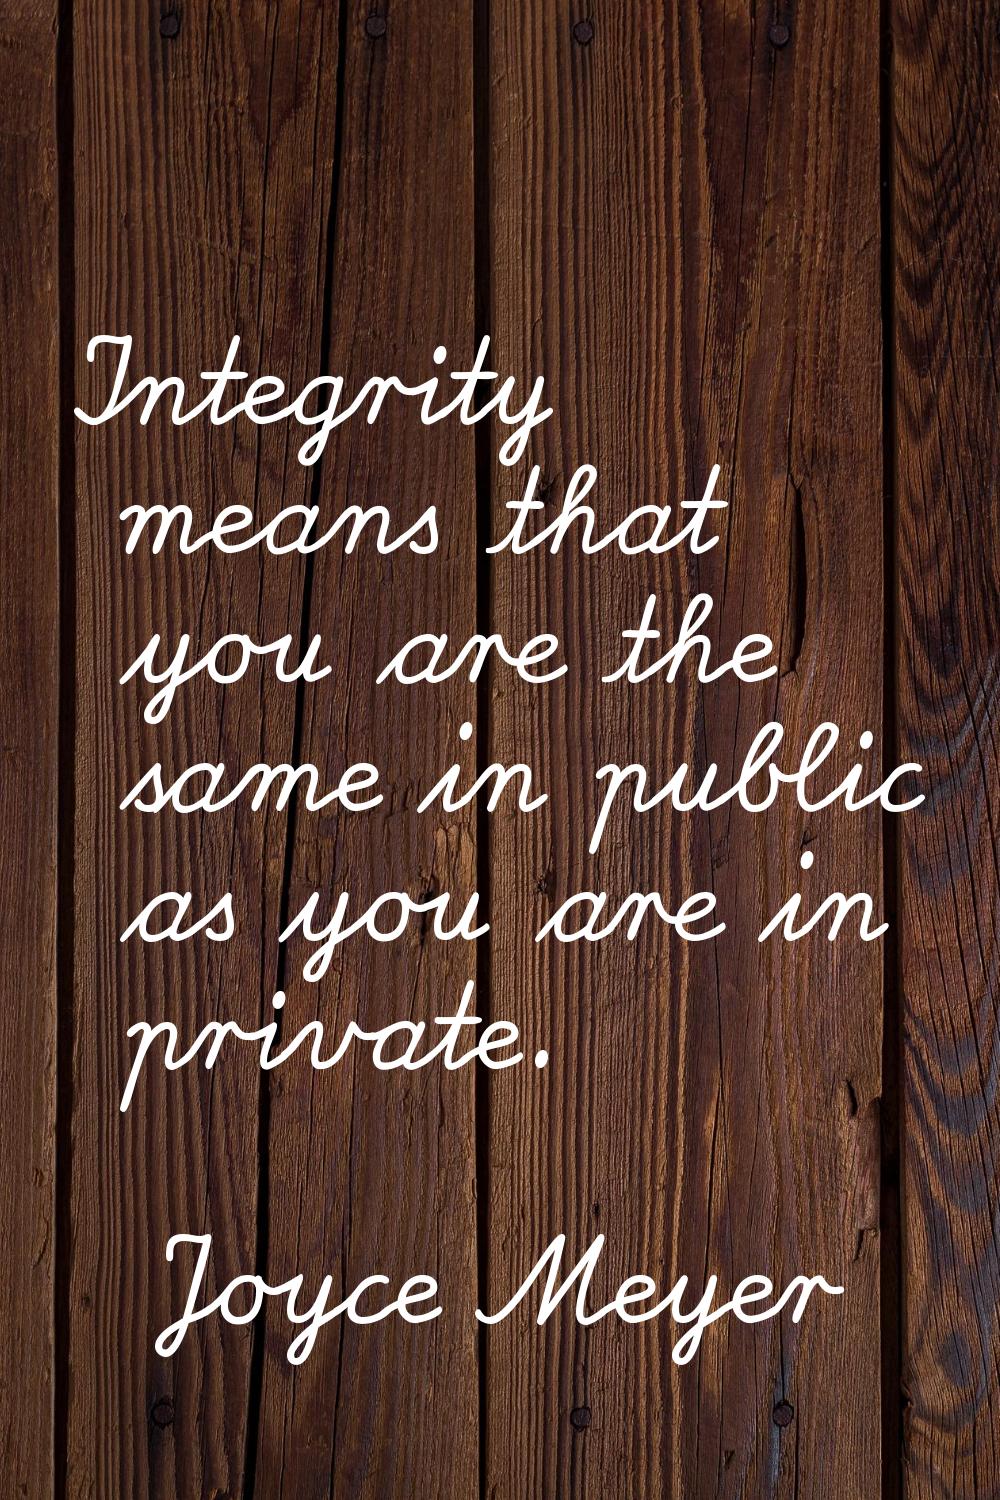 Integrity means that you are the same in public as you are in private.